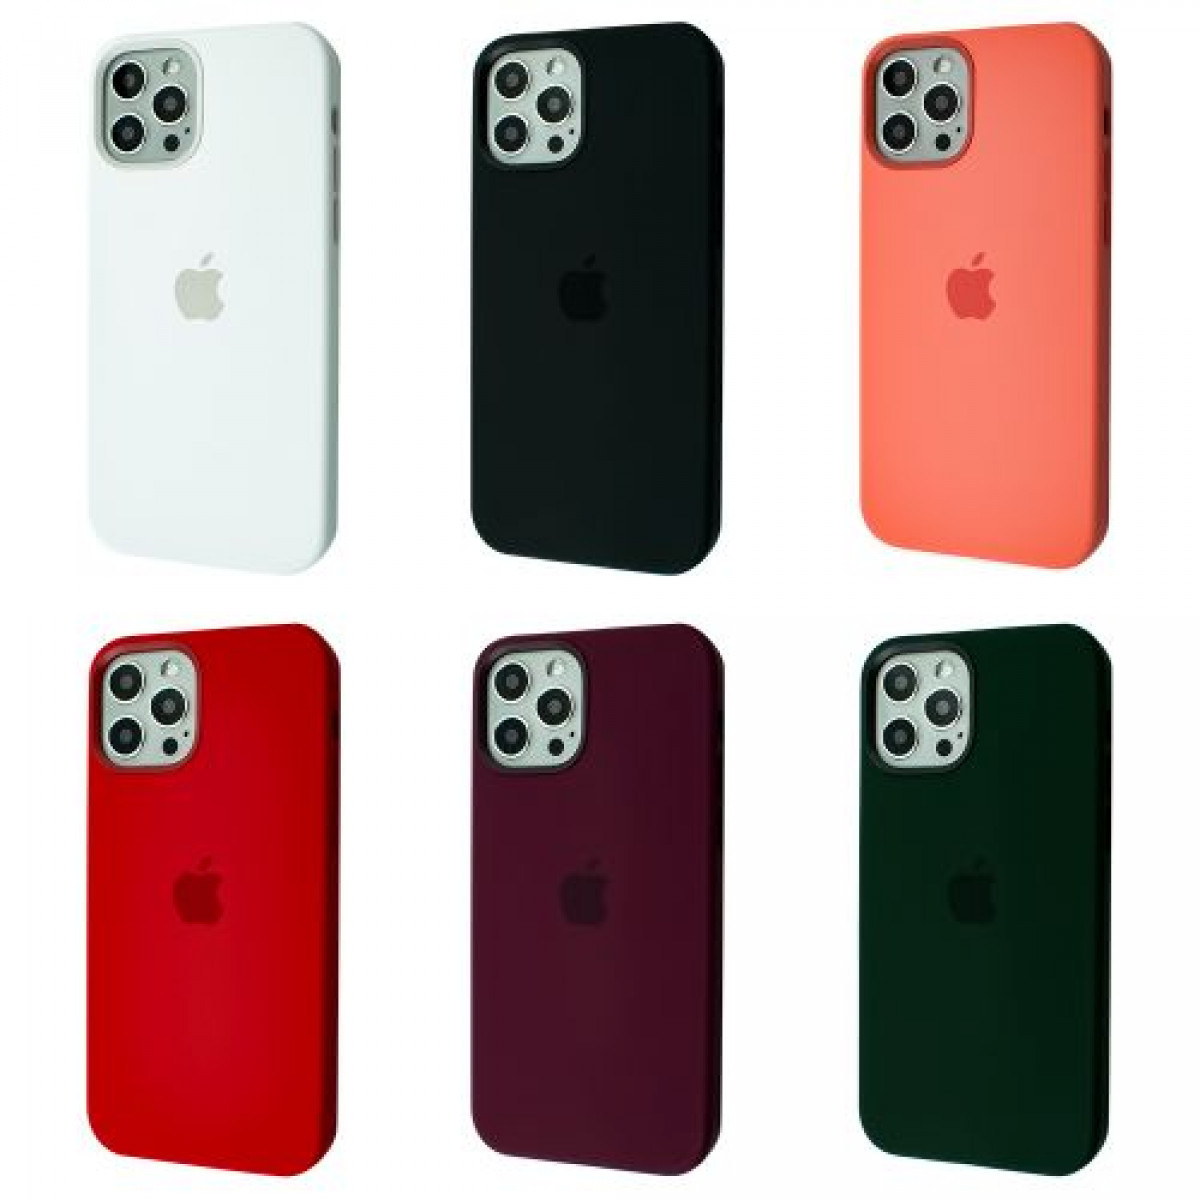 Silicone Case with MagSafe iPhone 12 Pro Max